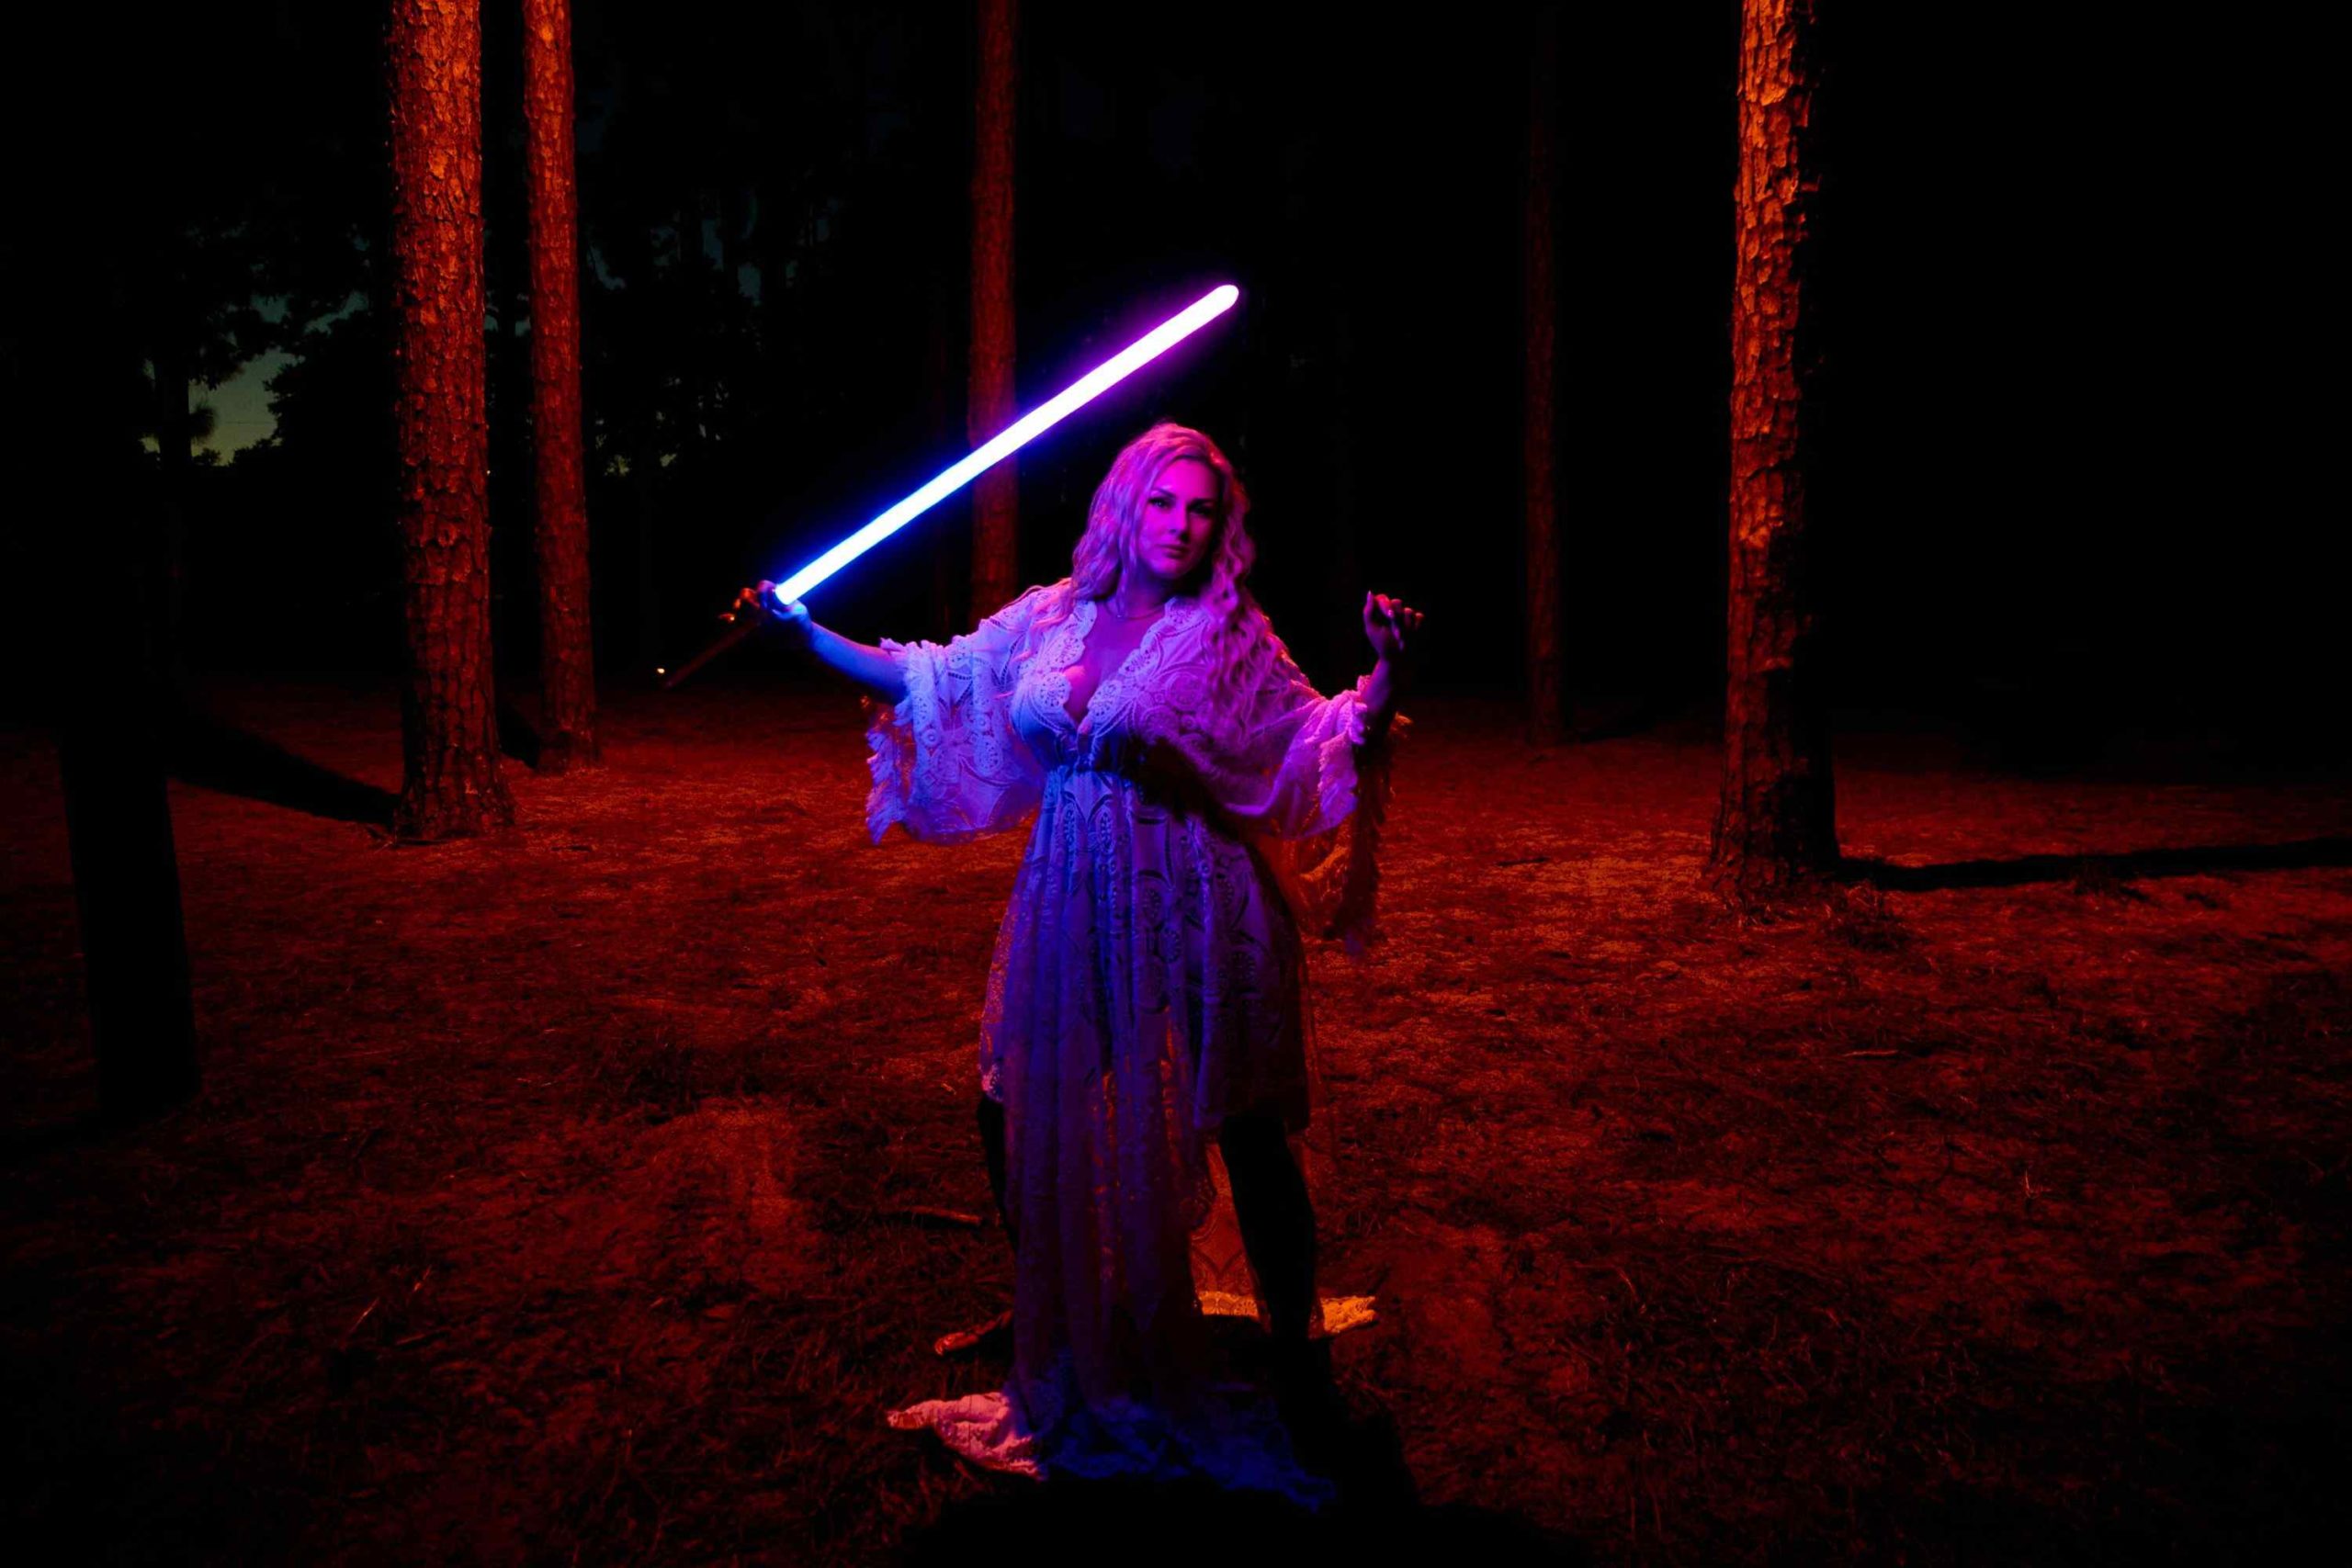 Portrait with lightsaber outside in the dark